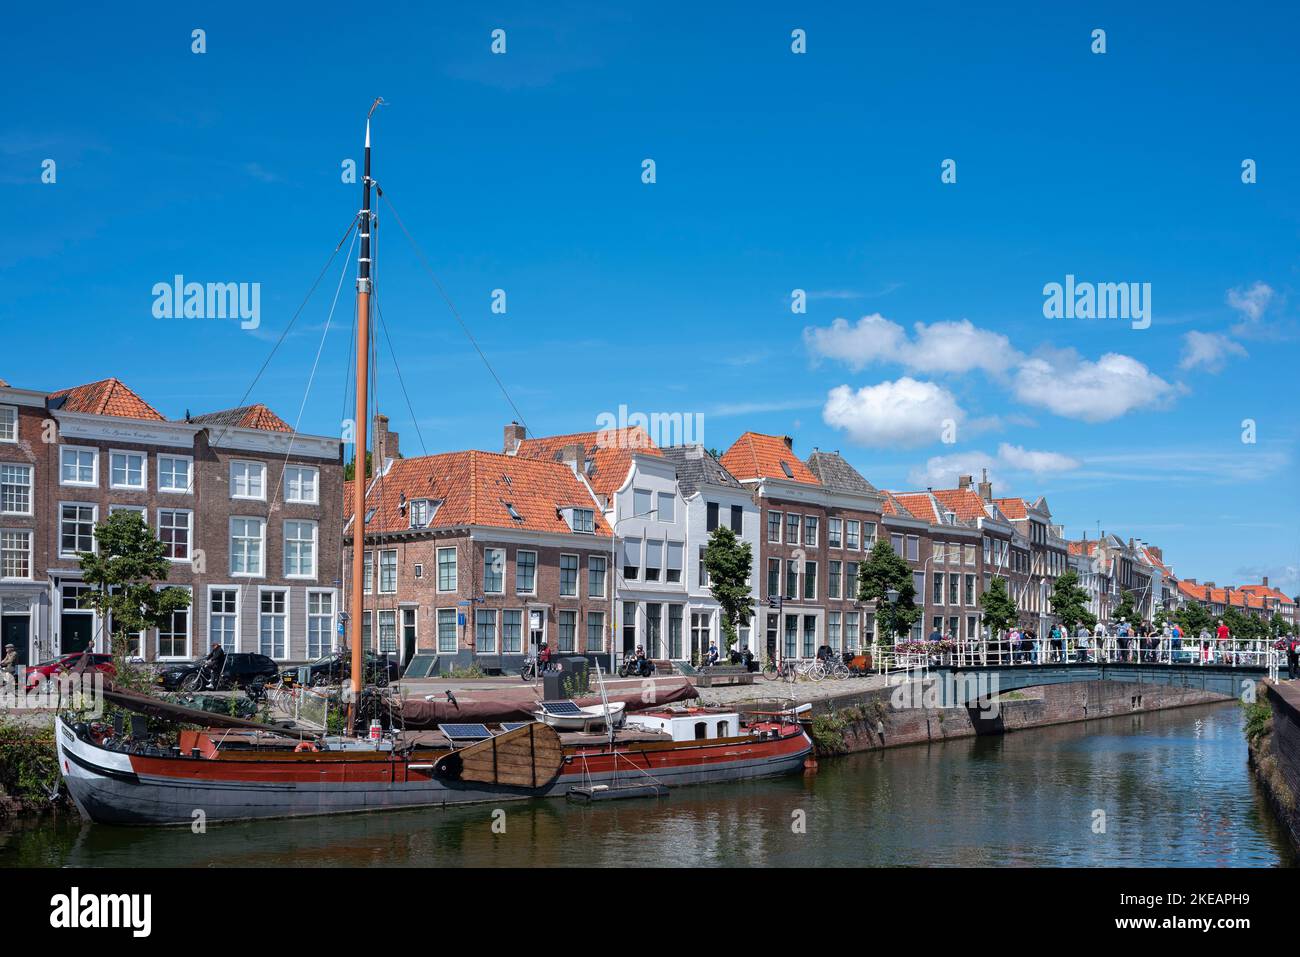 Cityscape with traditional flat-bottomed sailing boats on the Bierkaai,, Middelburg, Zeeland, Netherlands, Europe Stock Photo